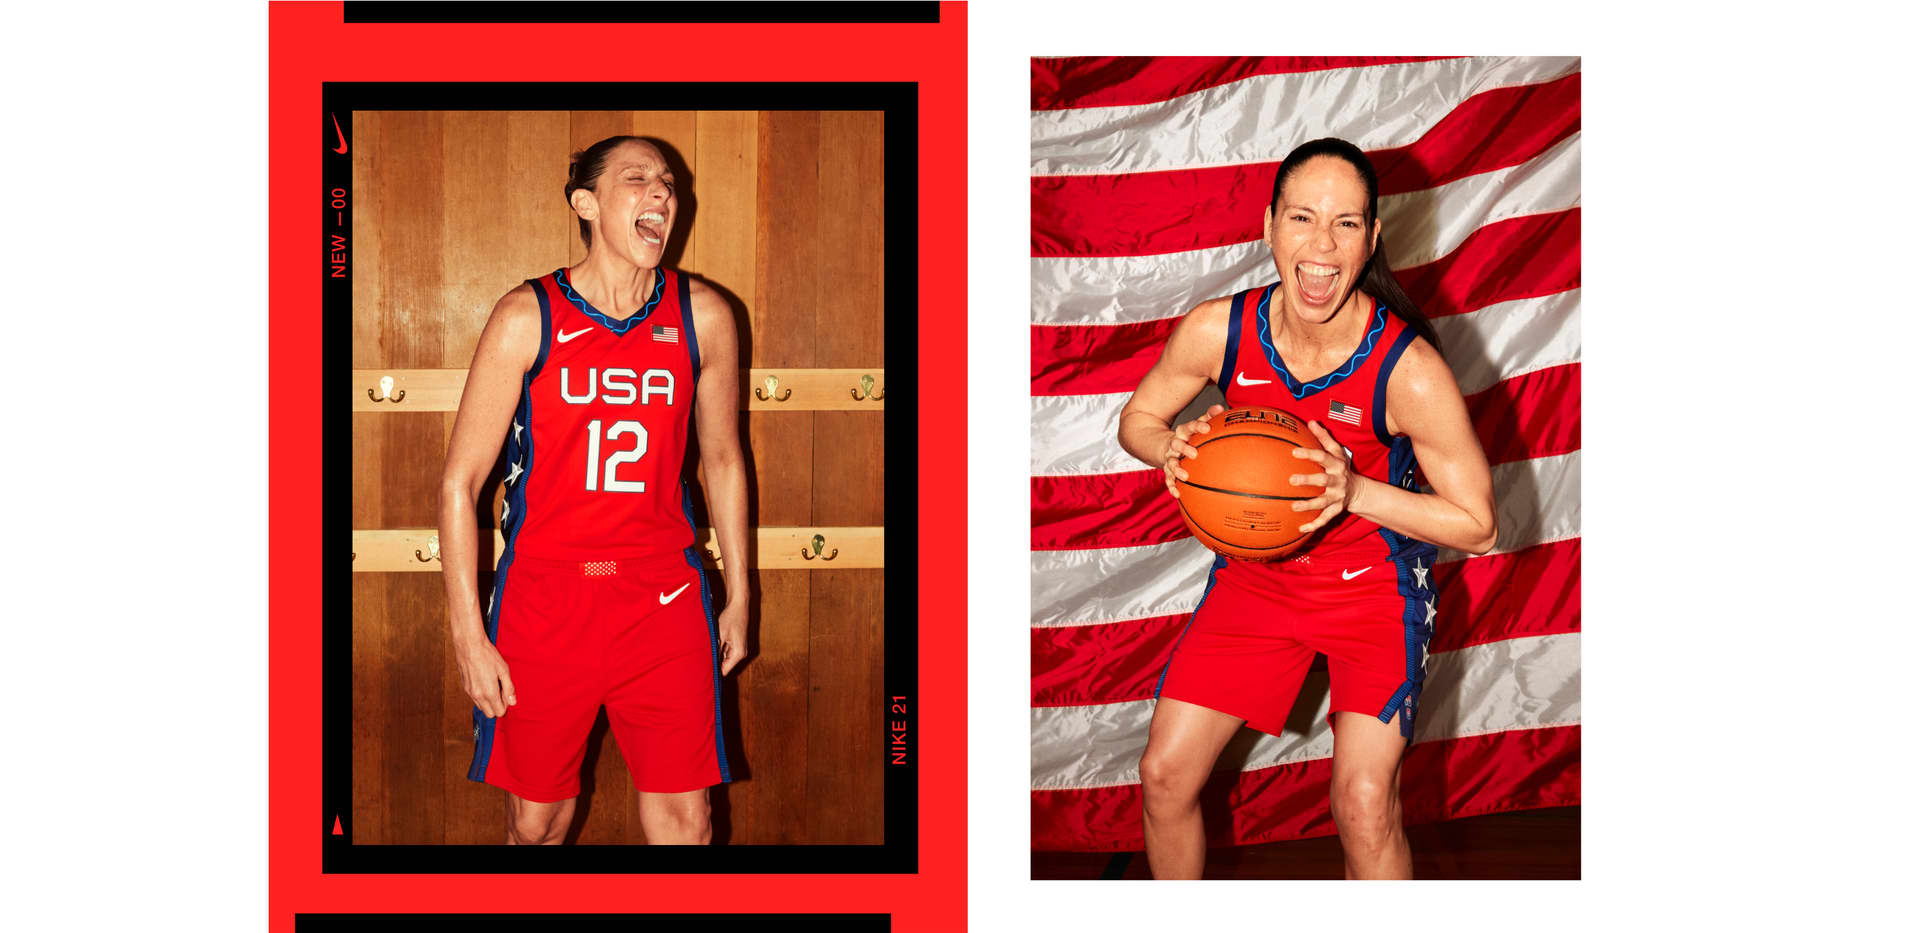 Nike Women's Basketball 2020 by Team Connection - Issuu